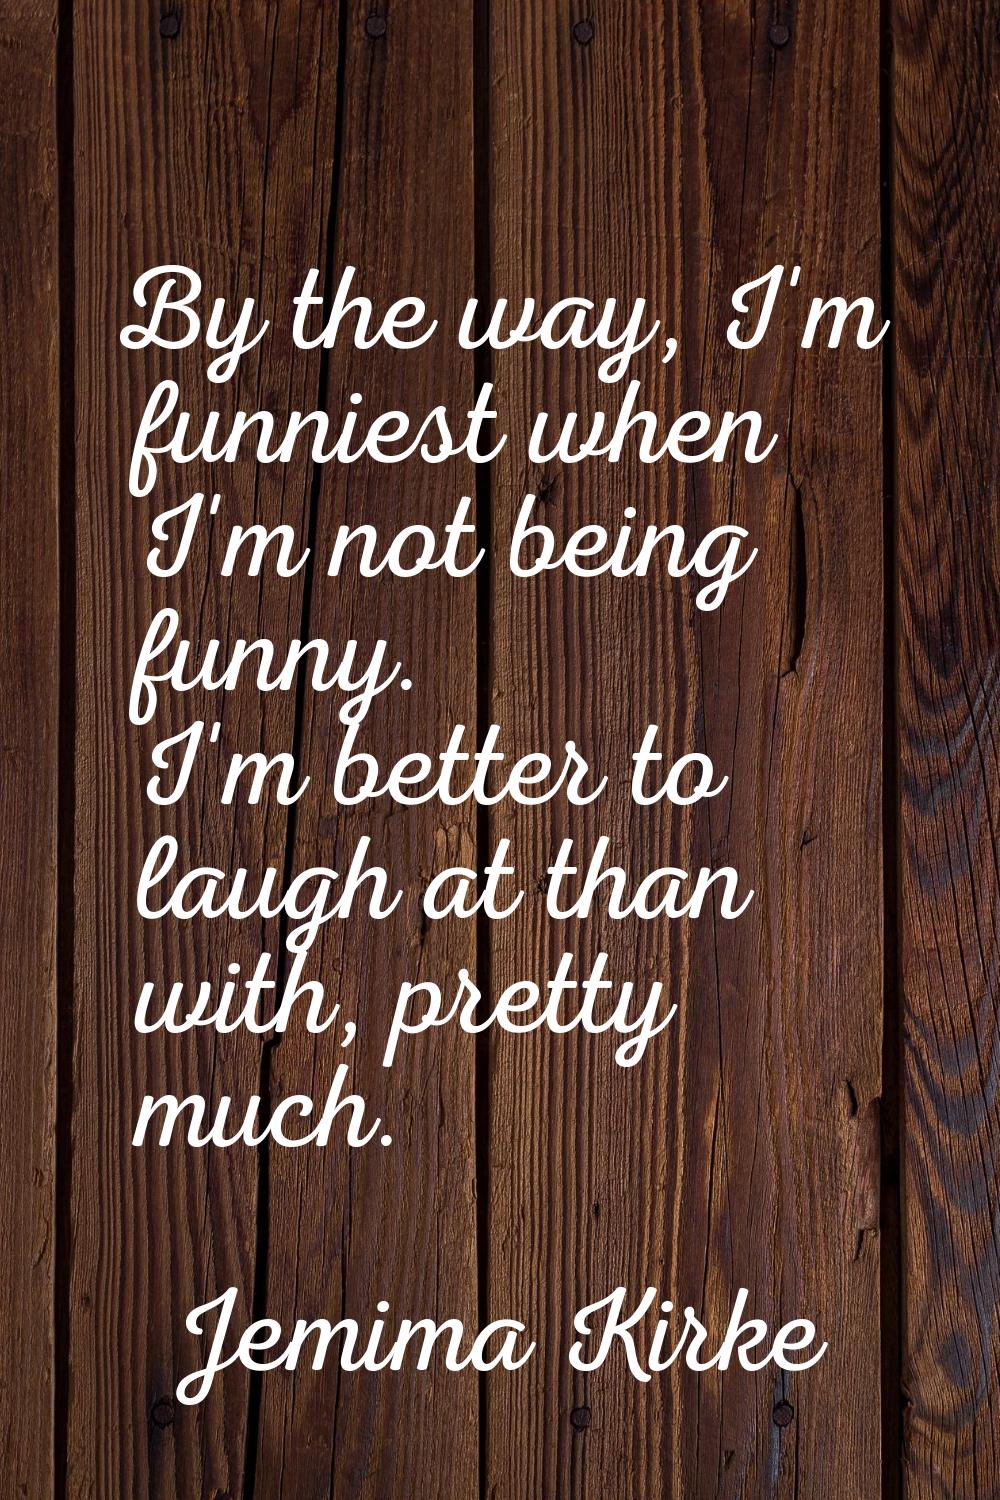 By the way, I'm funniest when I'm not being funny. I'm better to laugh at than with, pretty much.